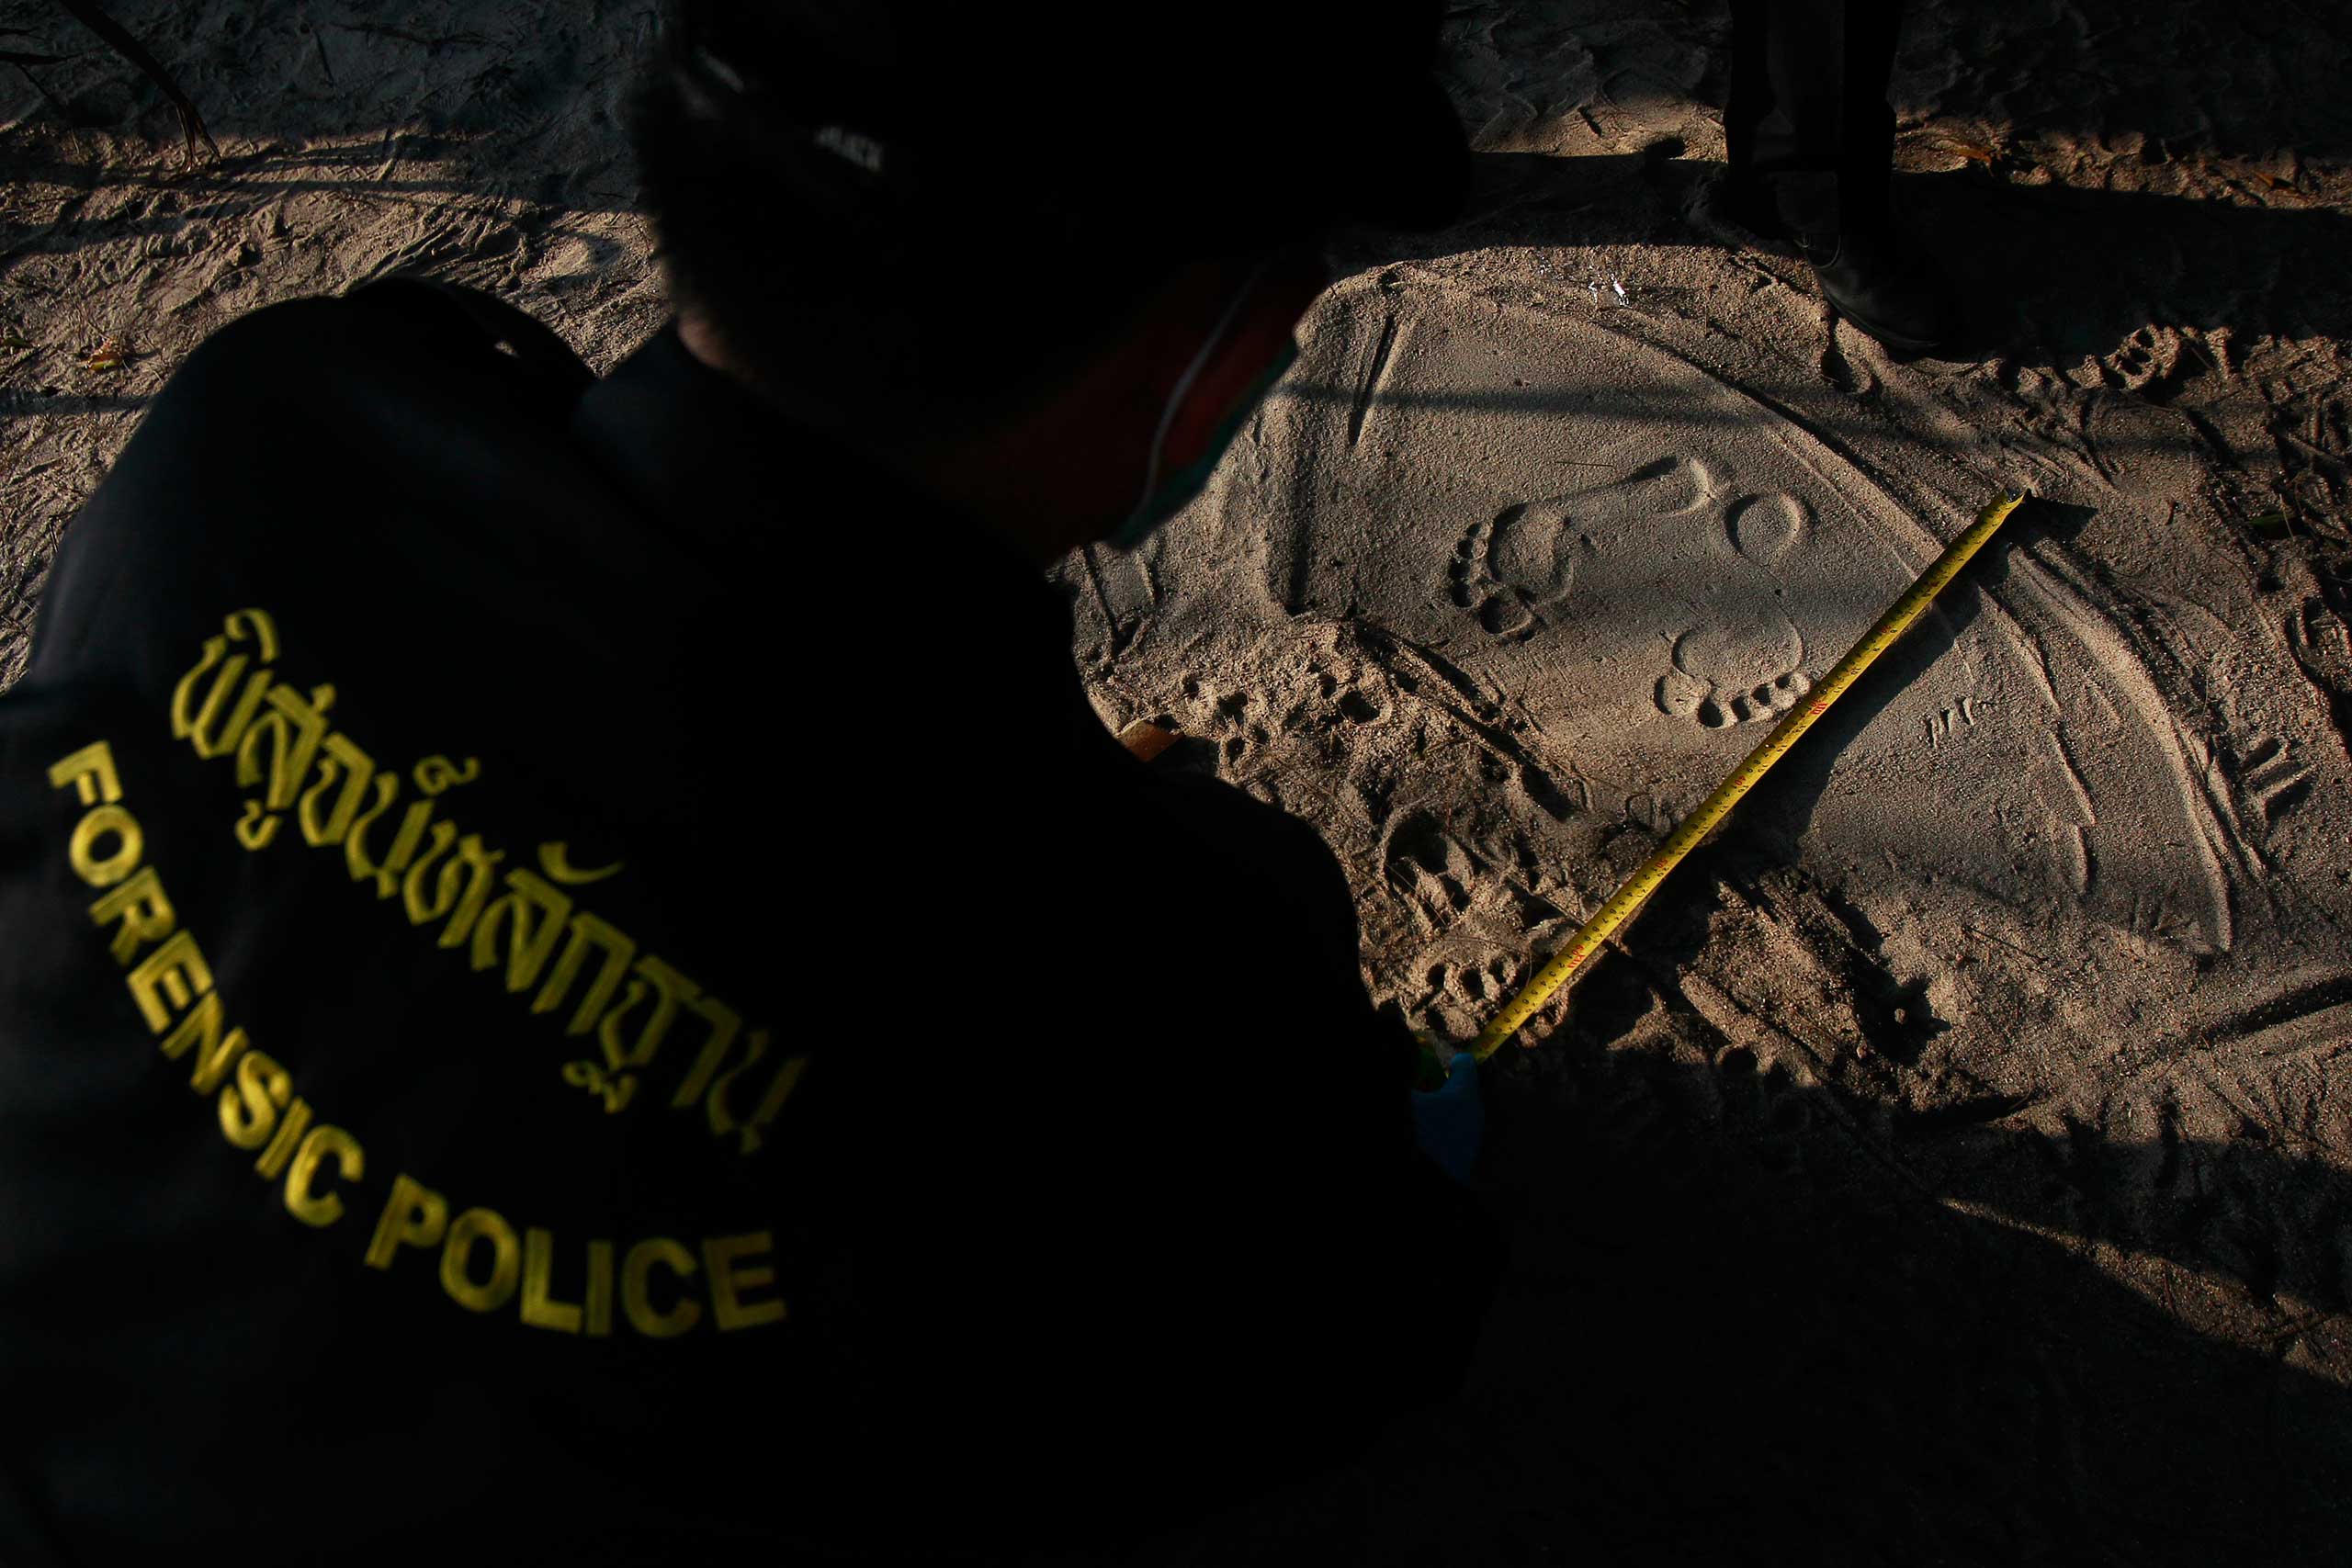 Police measure footprints of a man as data is collected from people who work near the spot where bodies of two killed British tourists were found, on the island of Koh Tao, Thailand, on Sept. 19, 2014 (Chaiwat Subprasom—Reuters)